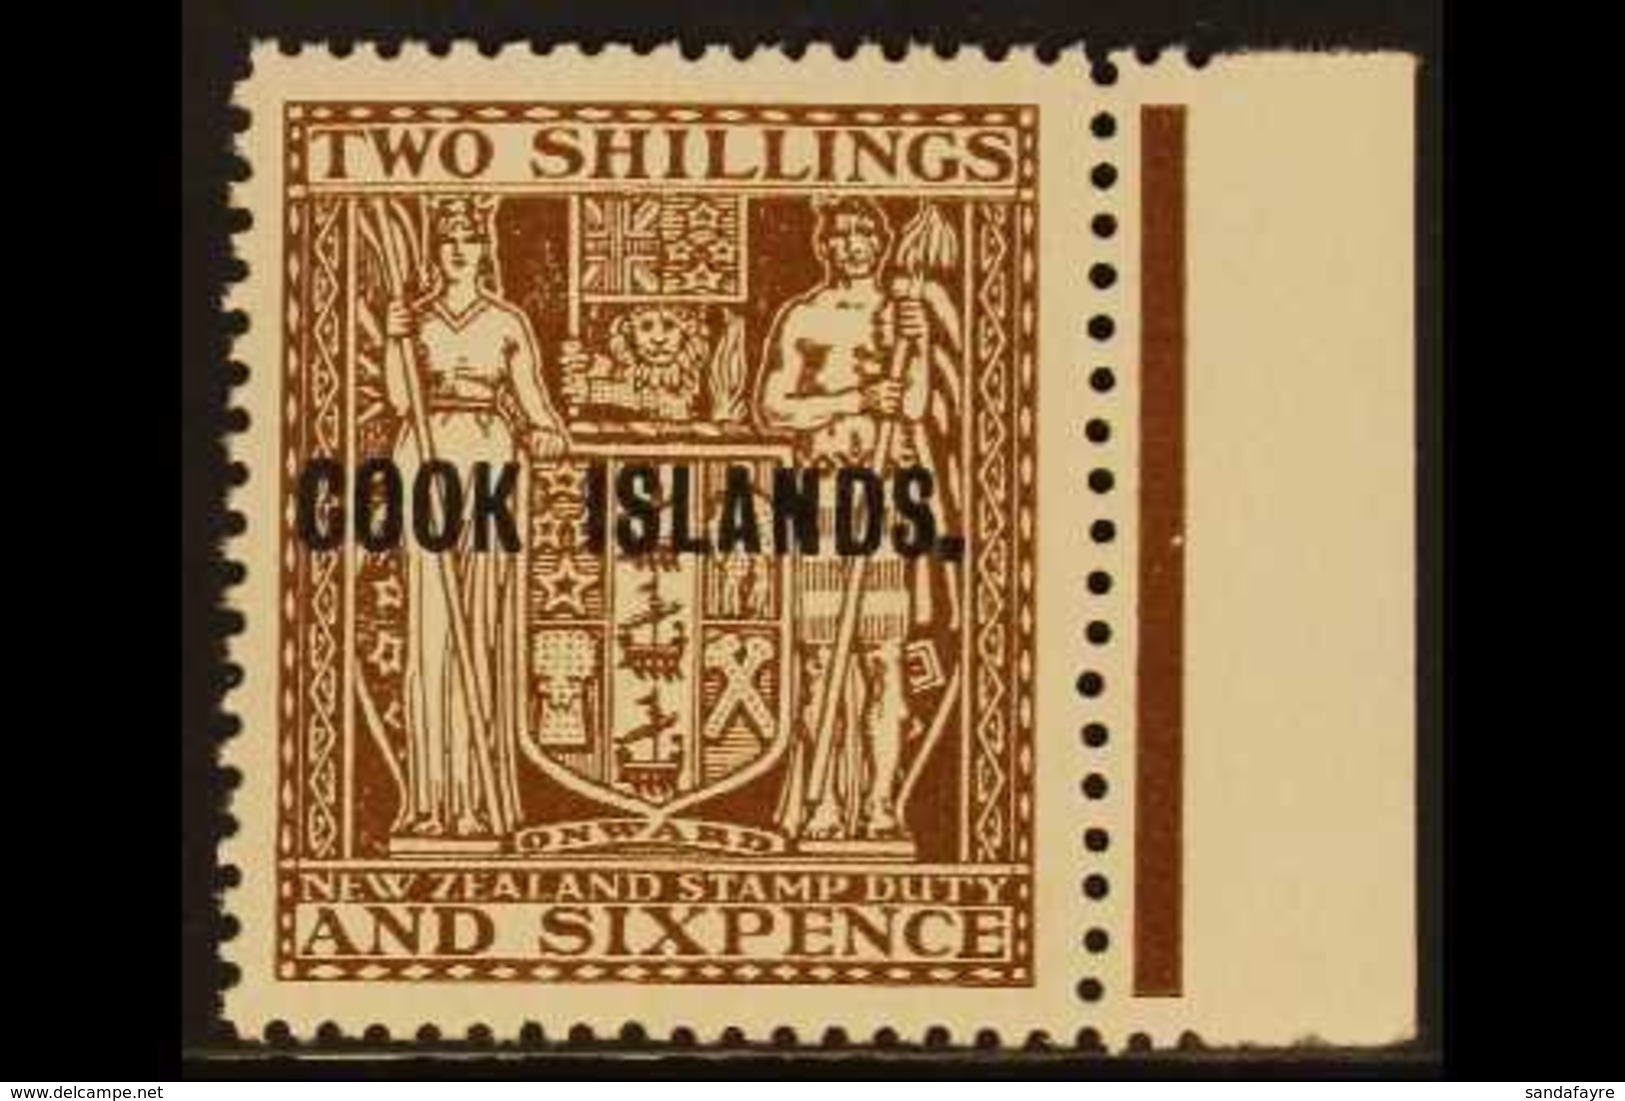 1943-54 2s6d Dull Brown Postal Fiscal Of New Zealand With "COOK ISLANDS" Overprint, Watermark Upright, SG 131, Never Hin - Cook